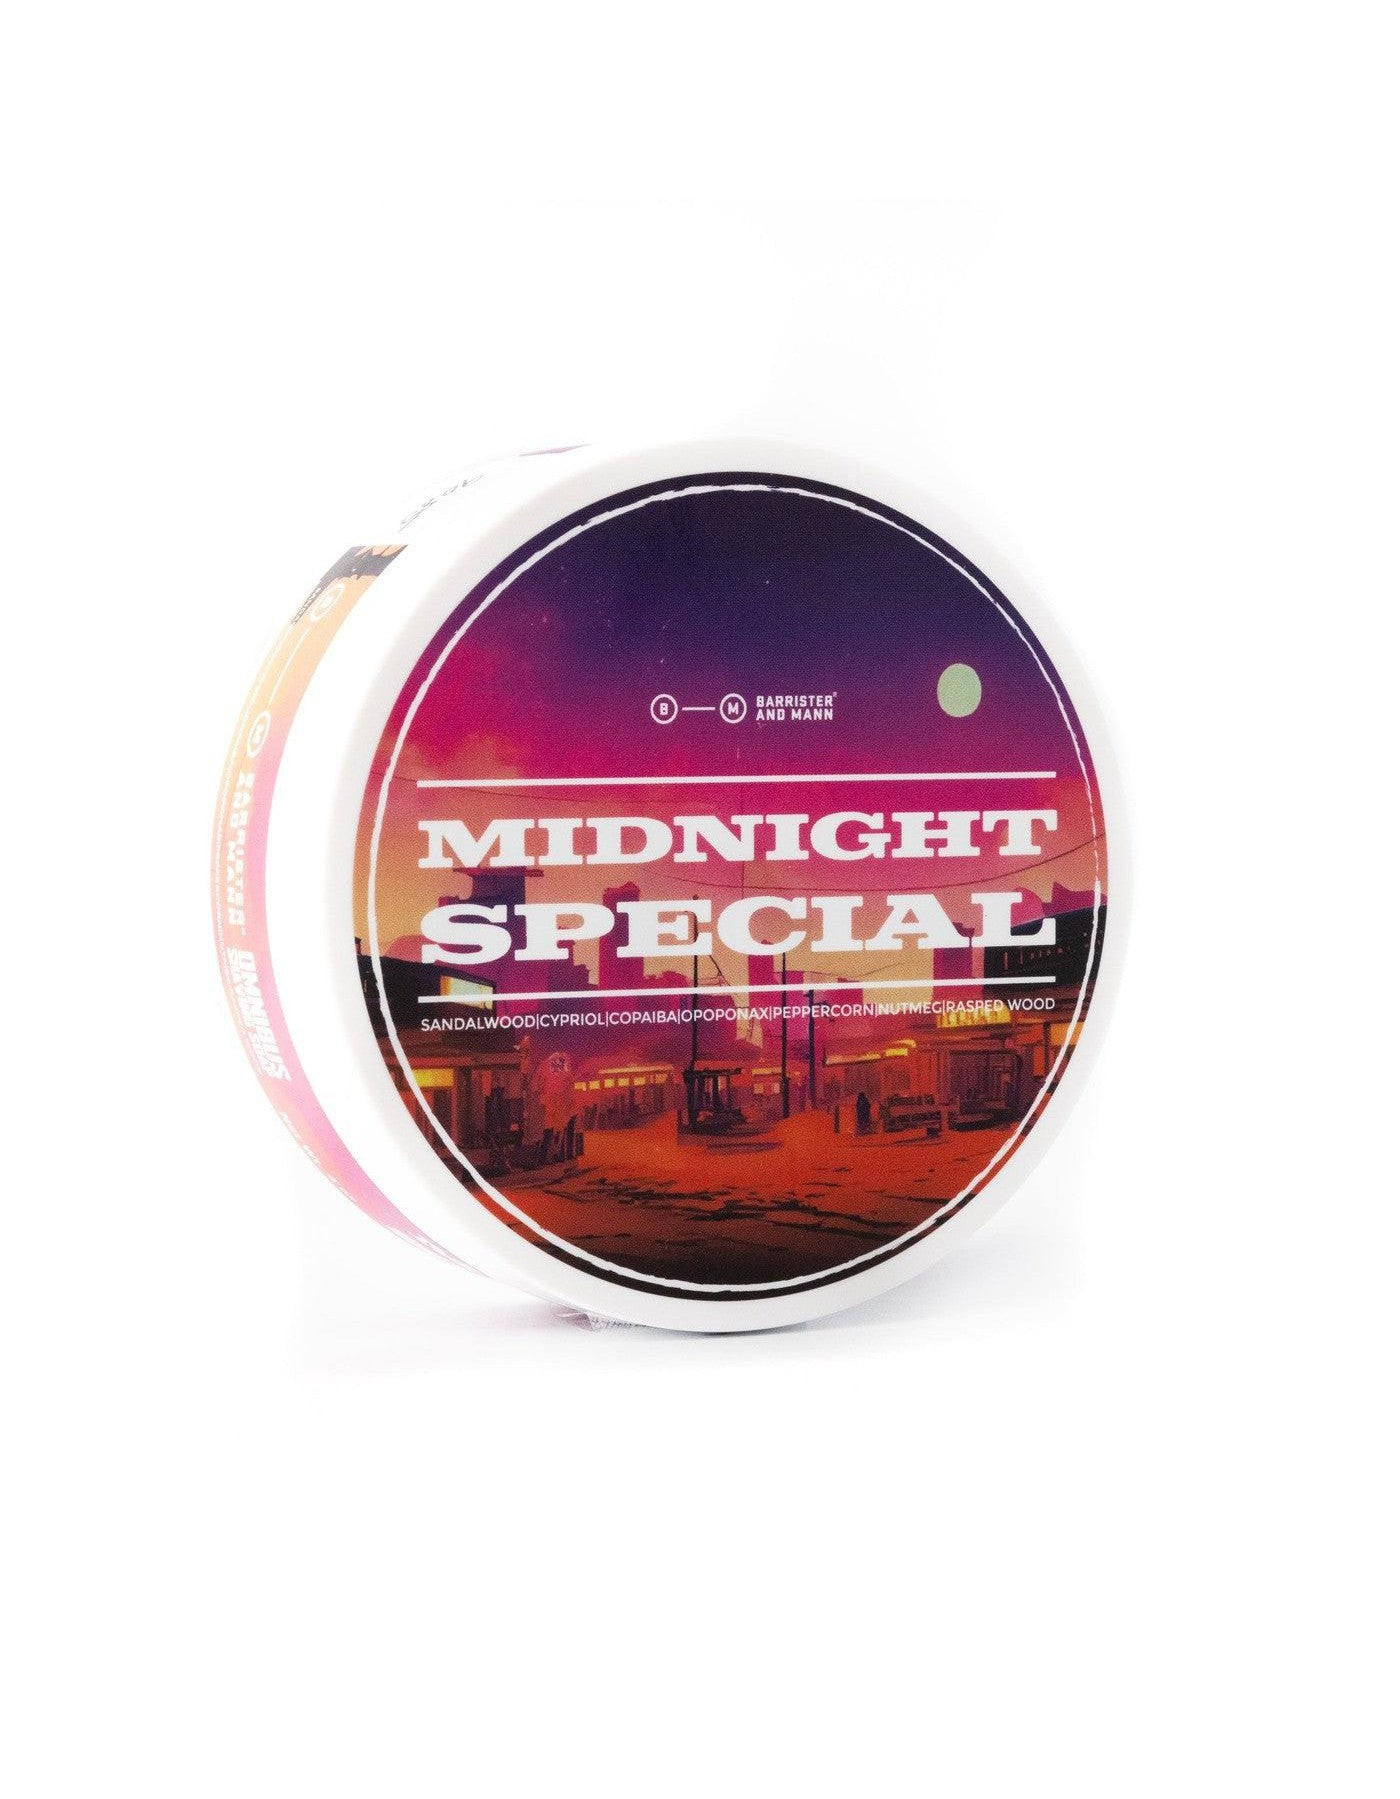 Barrister and Mann Shaving Soap, Midnight Special